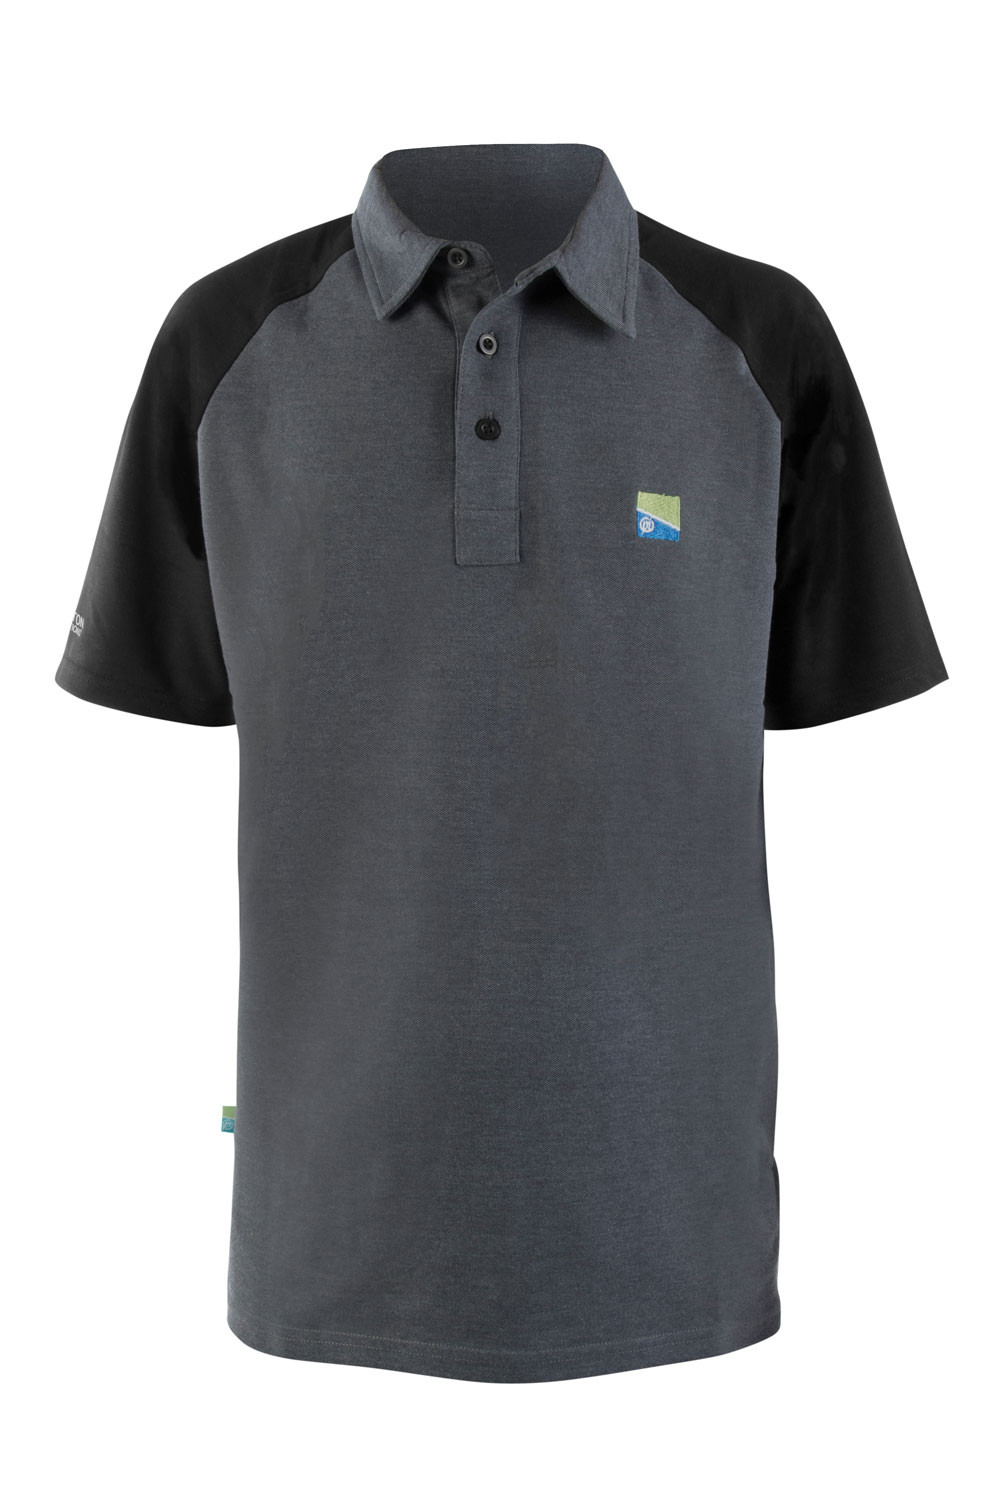 Image of Polo Shirts  by  Innovations